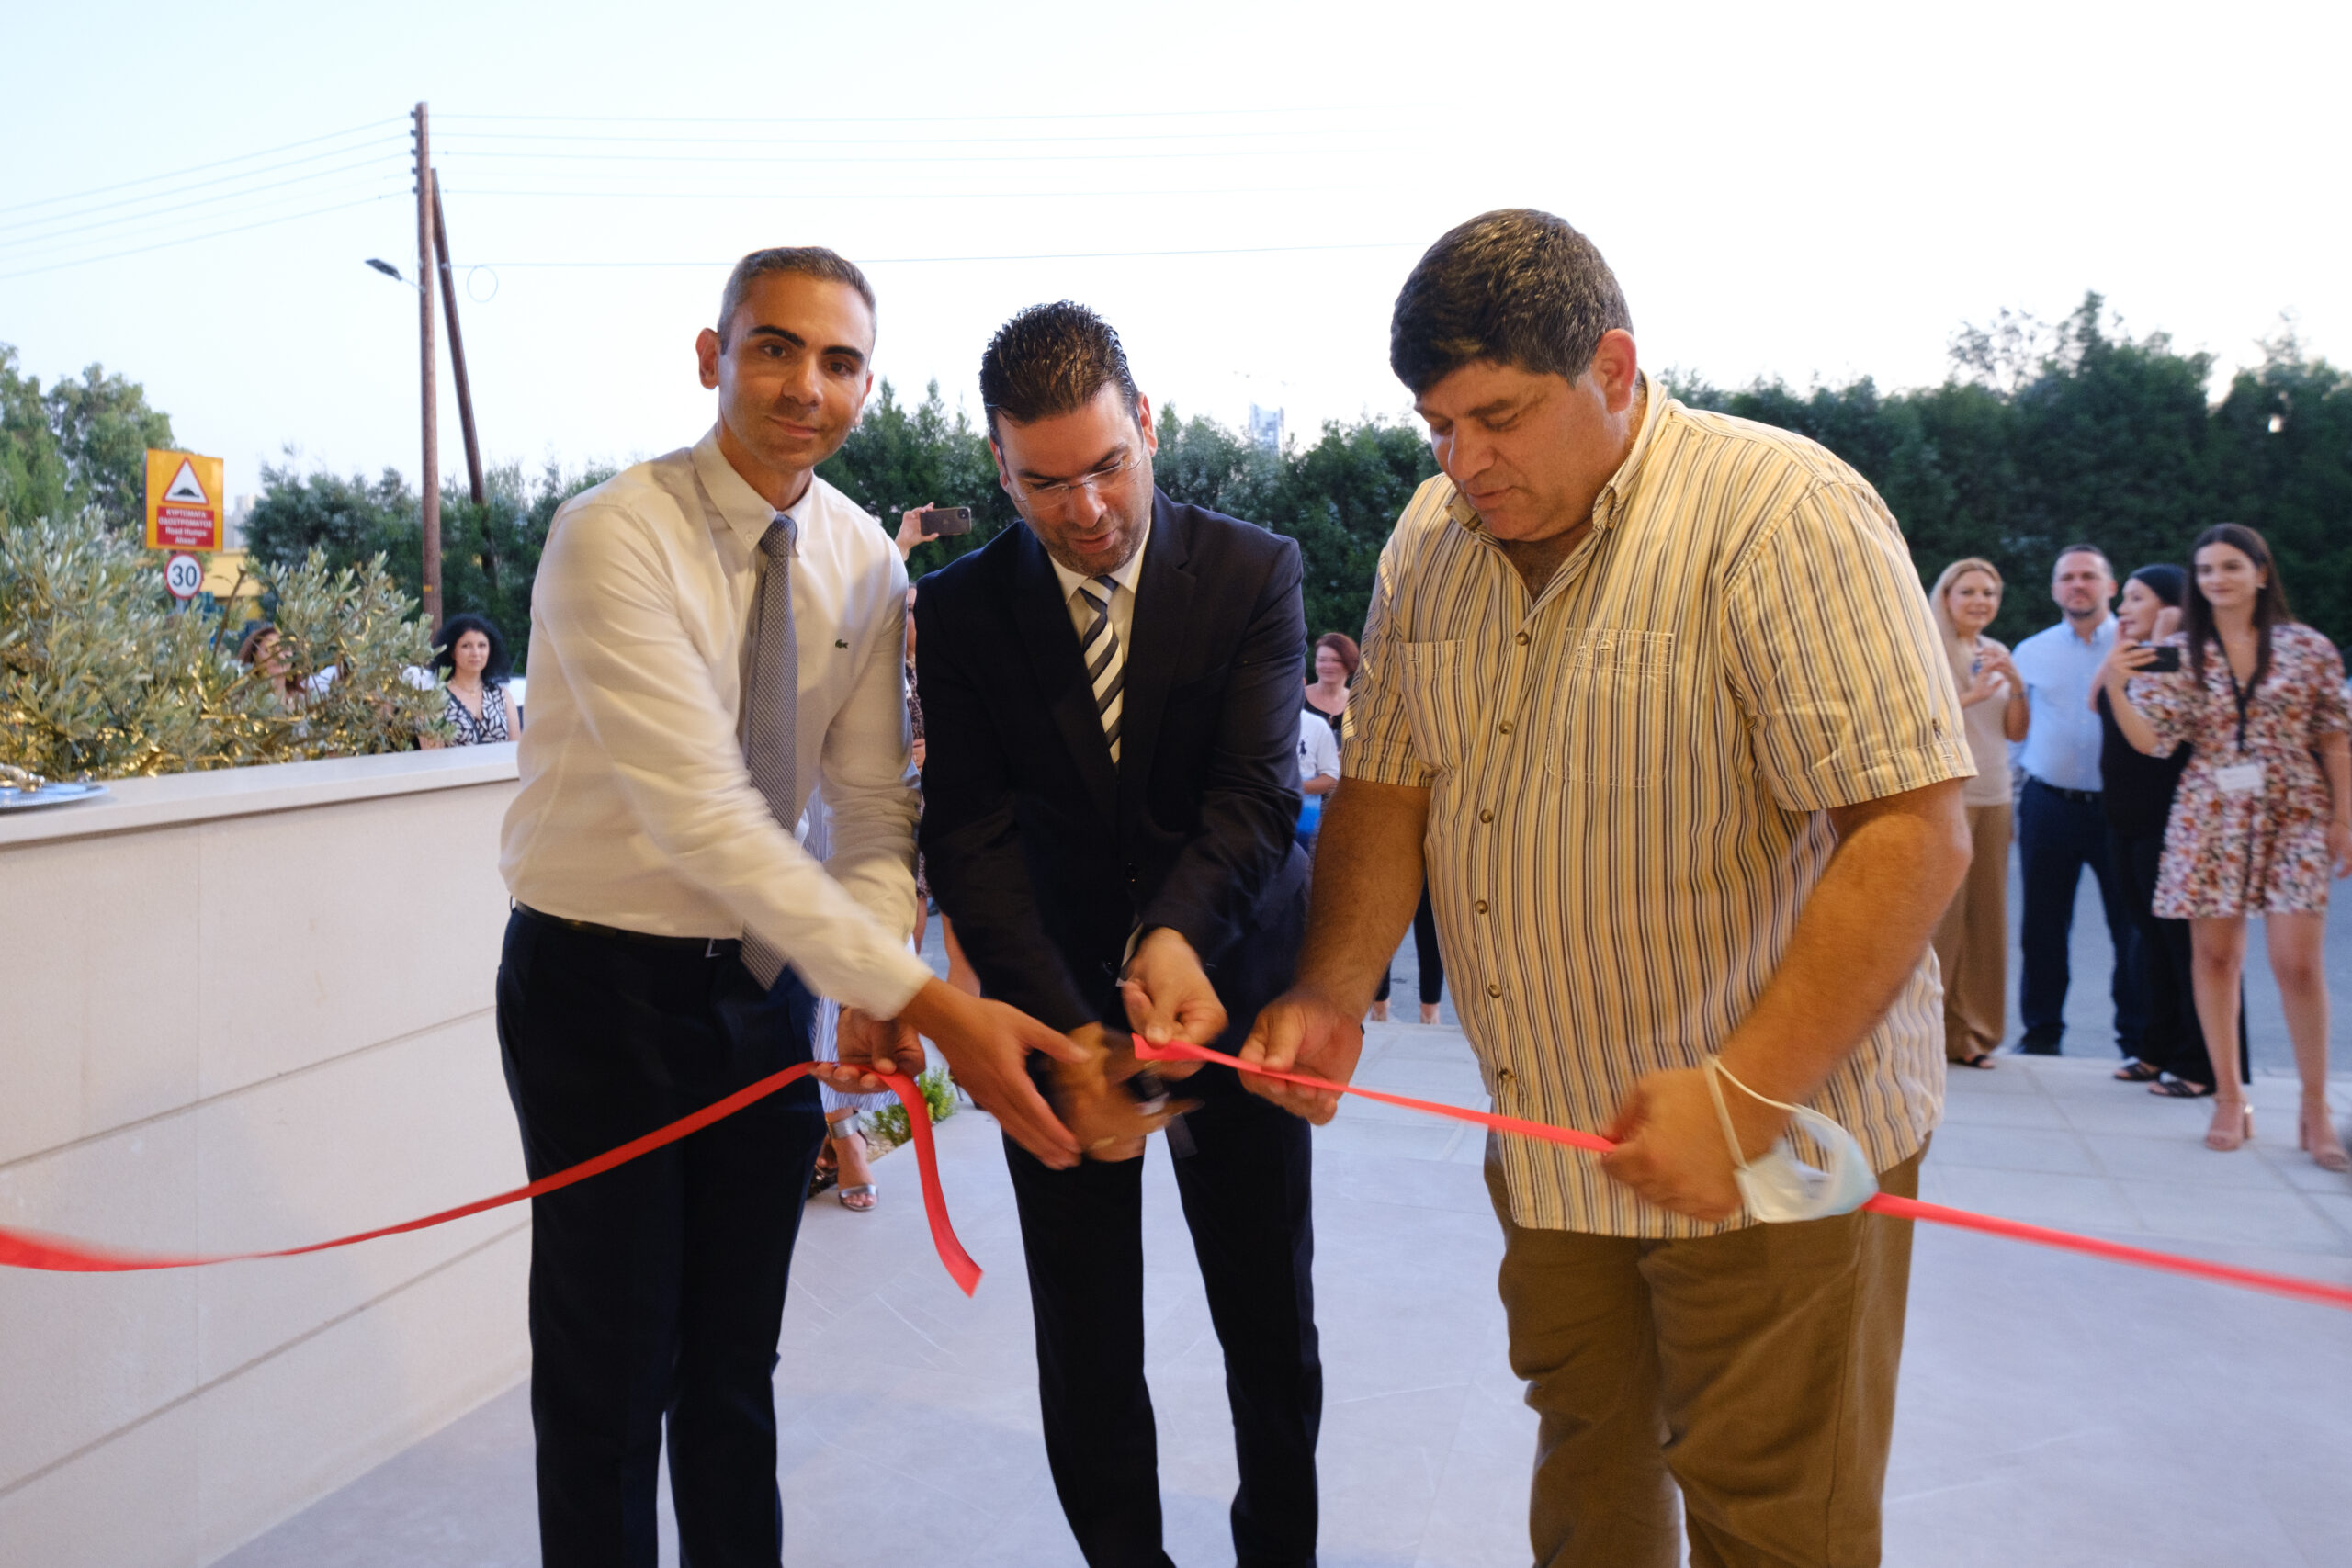 Inauguration of Winstonfield Residences – a project by Winstonfield Property Developers